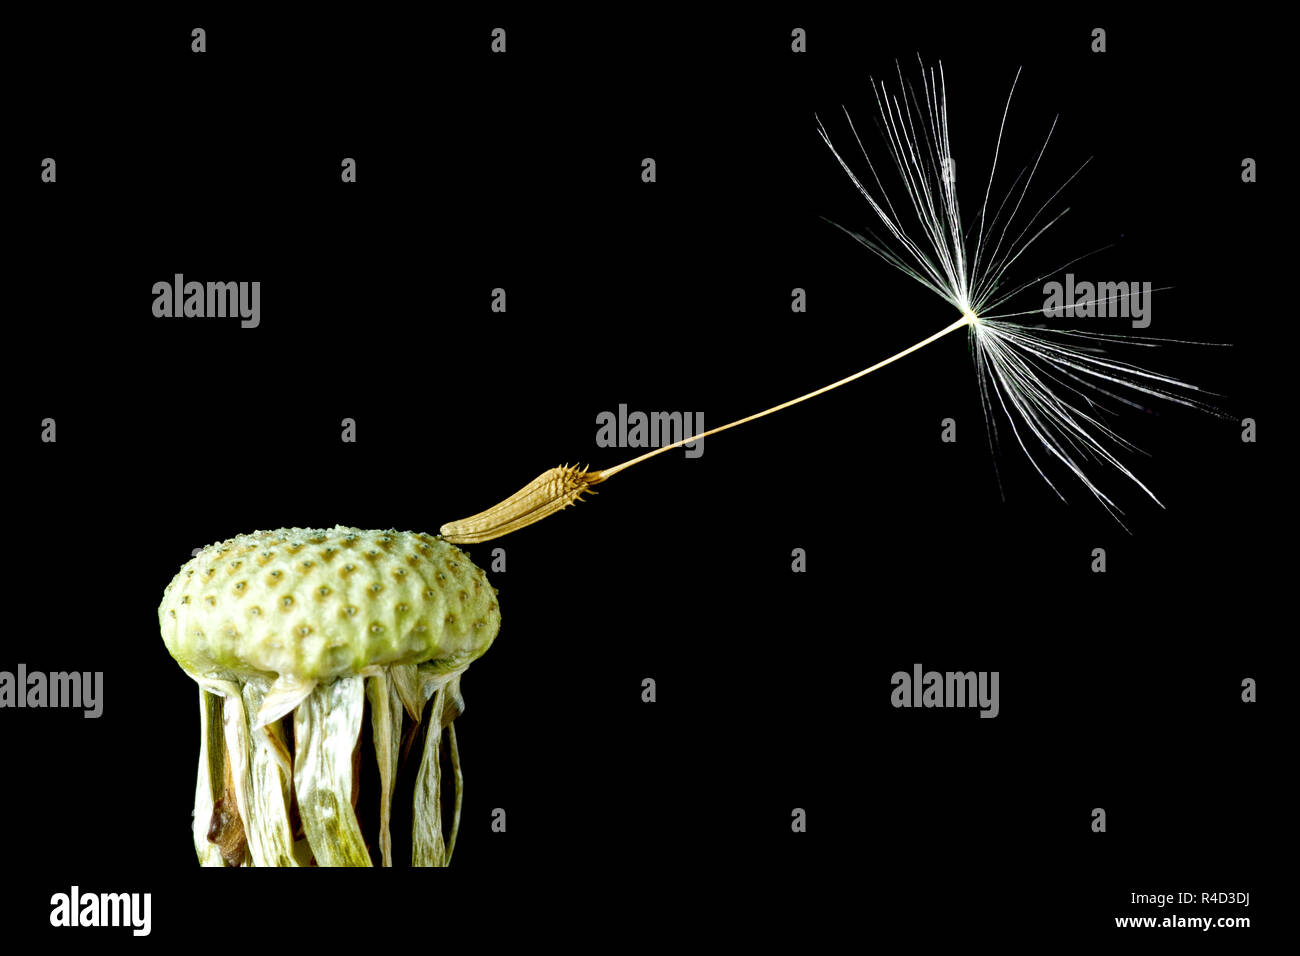 Dandelion seed head (taraxacum officinale), a close up still life of the last seed attached to the seed head against a black background. Stock Photo